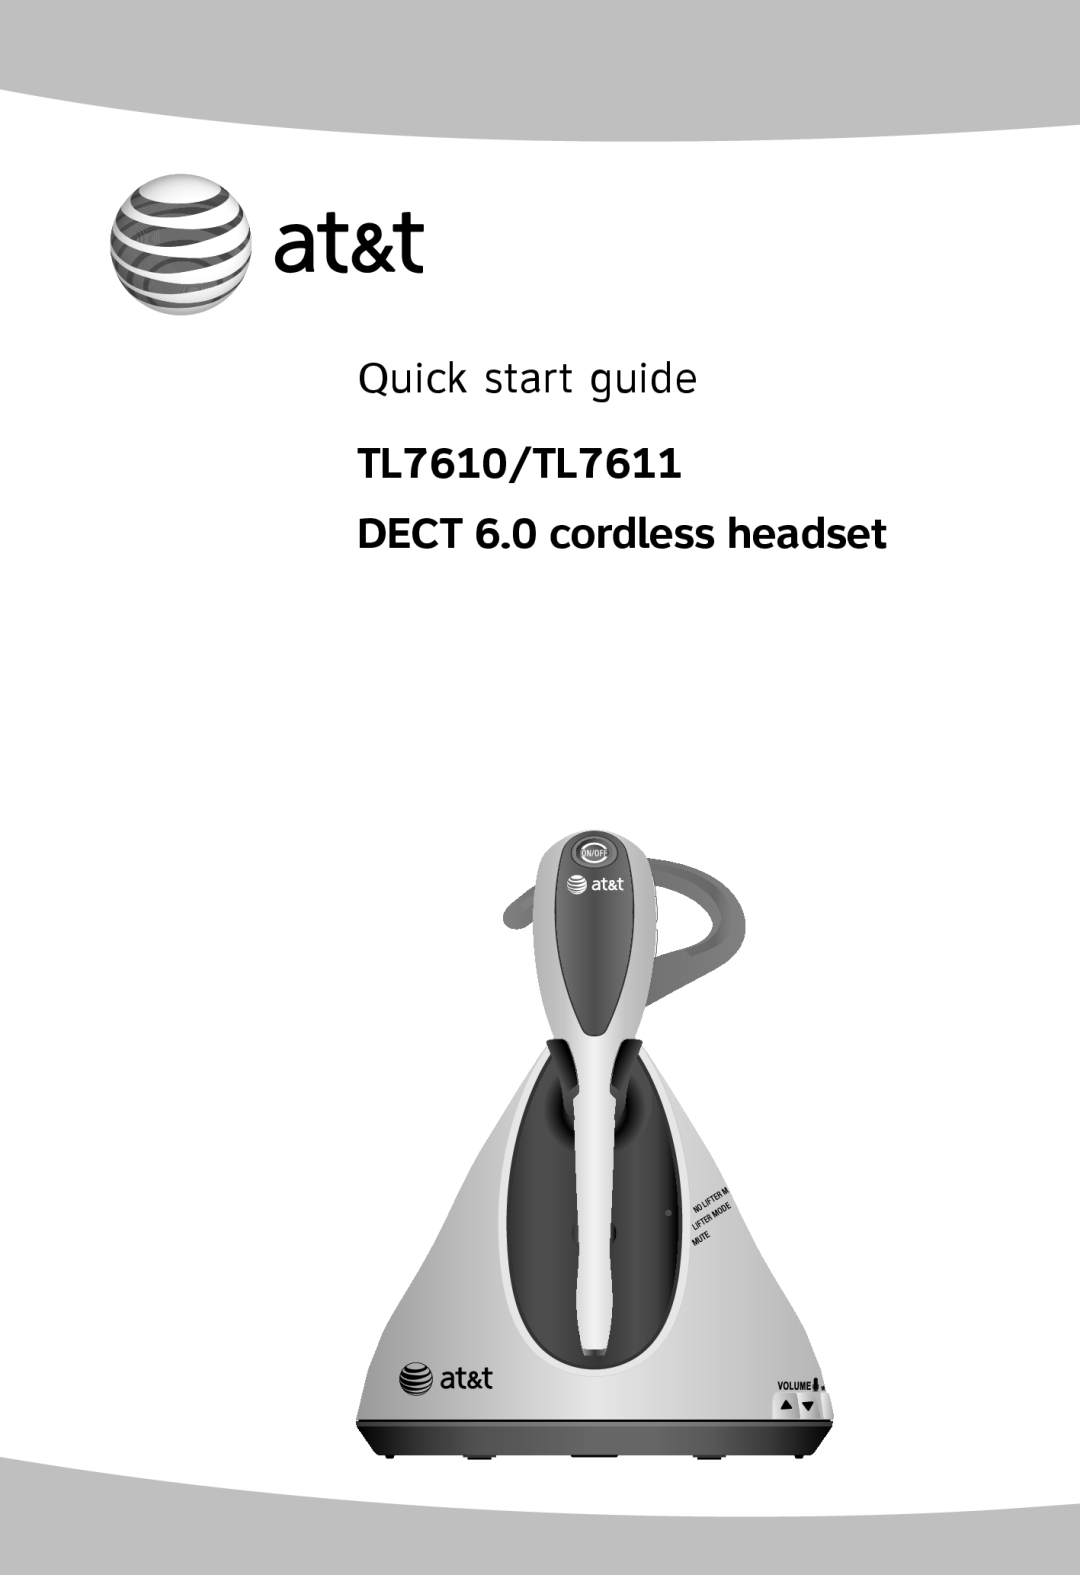 AT&T TL760 quick start Quick start guide, TL7610/TL7611 DECT 6.0 cordless headset 